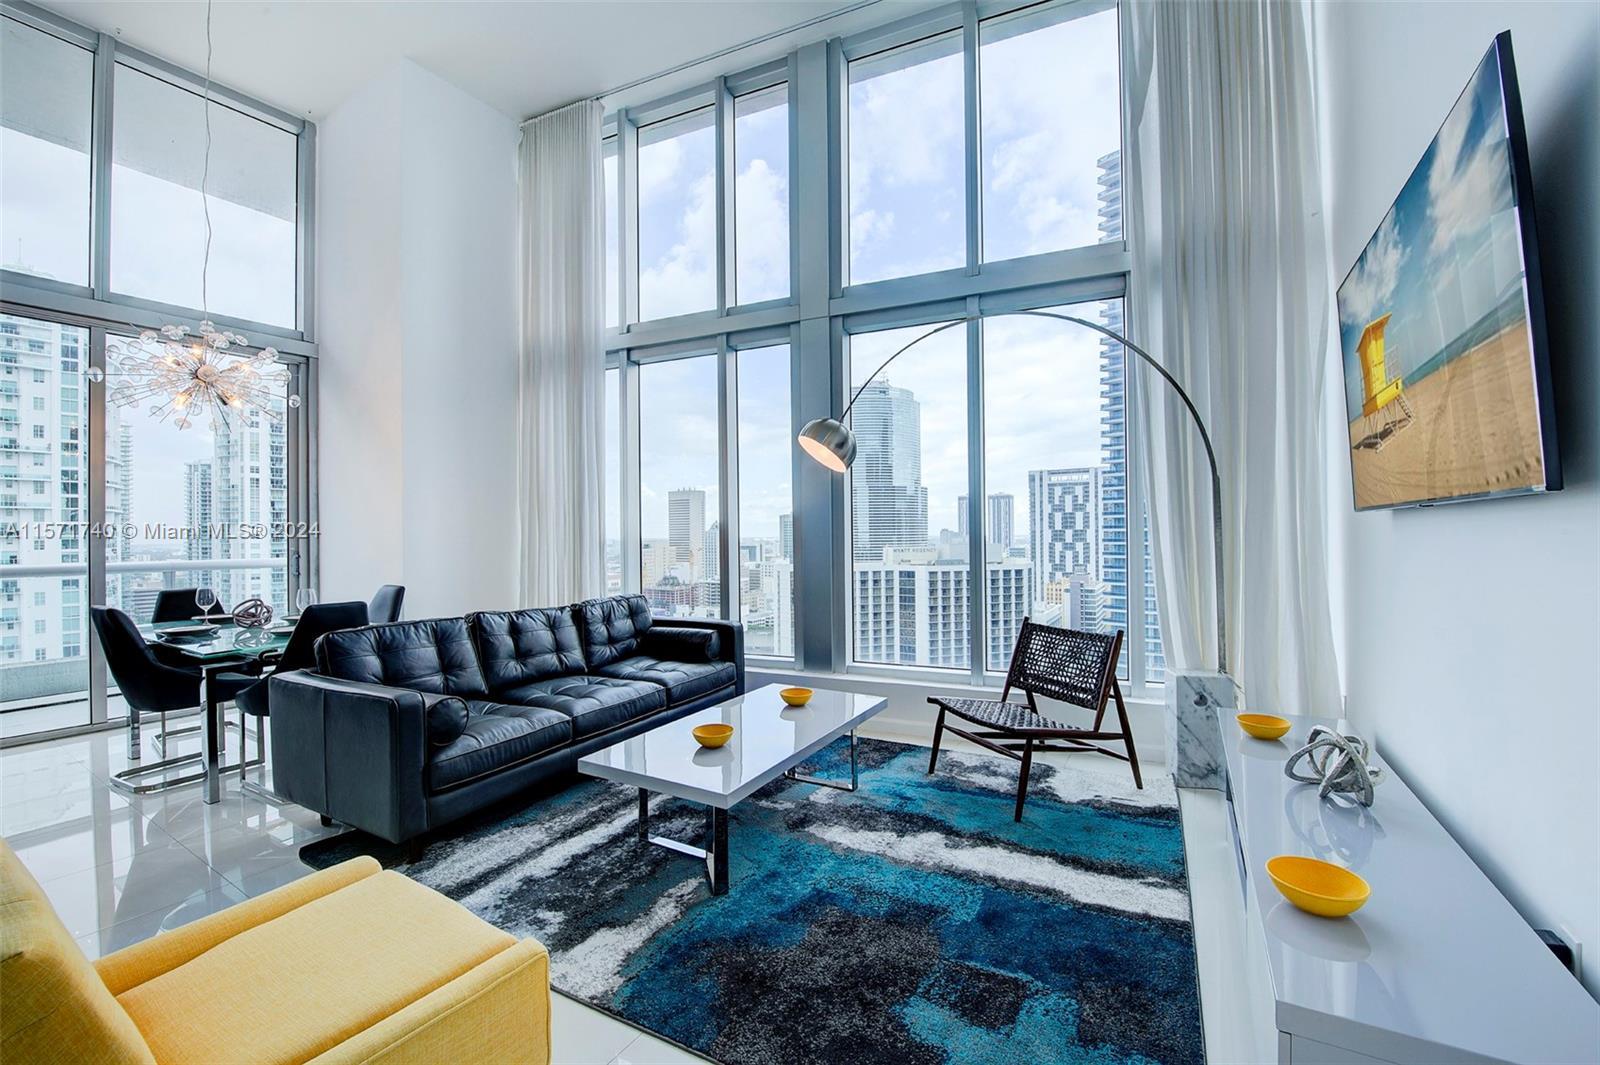 Rare 2/2 NE Corner Unit at Icon Brickell with 16ft. Double-height ceilings, Bay, and Ocean Views. Sh